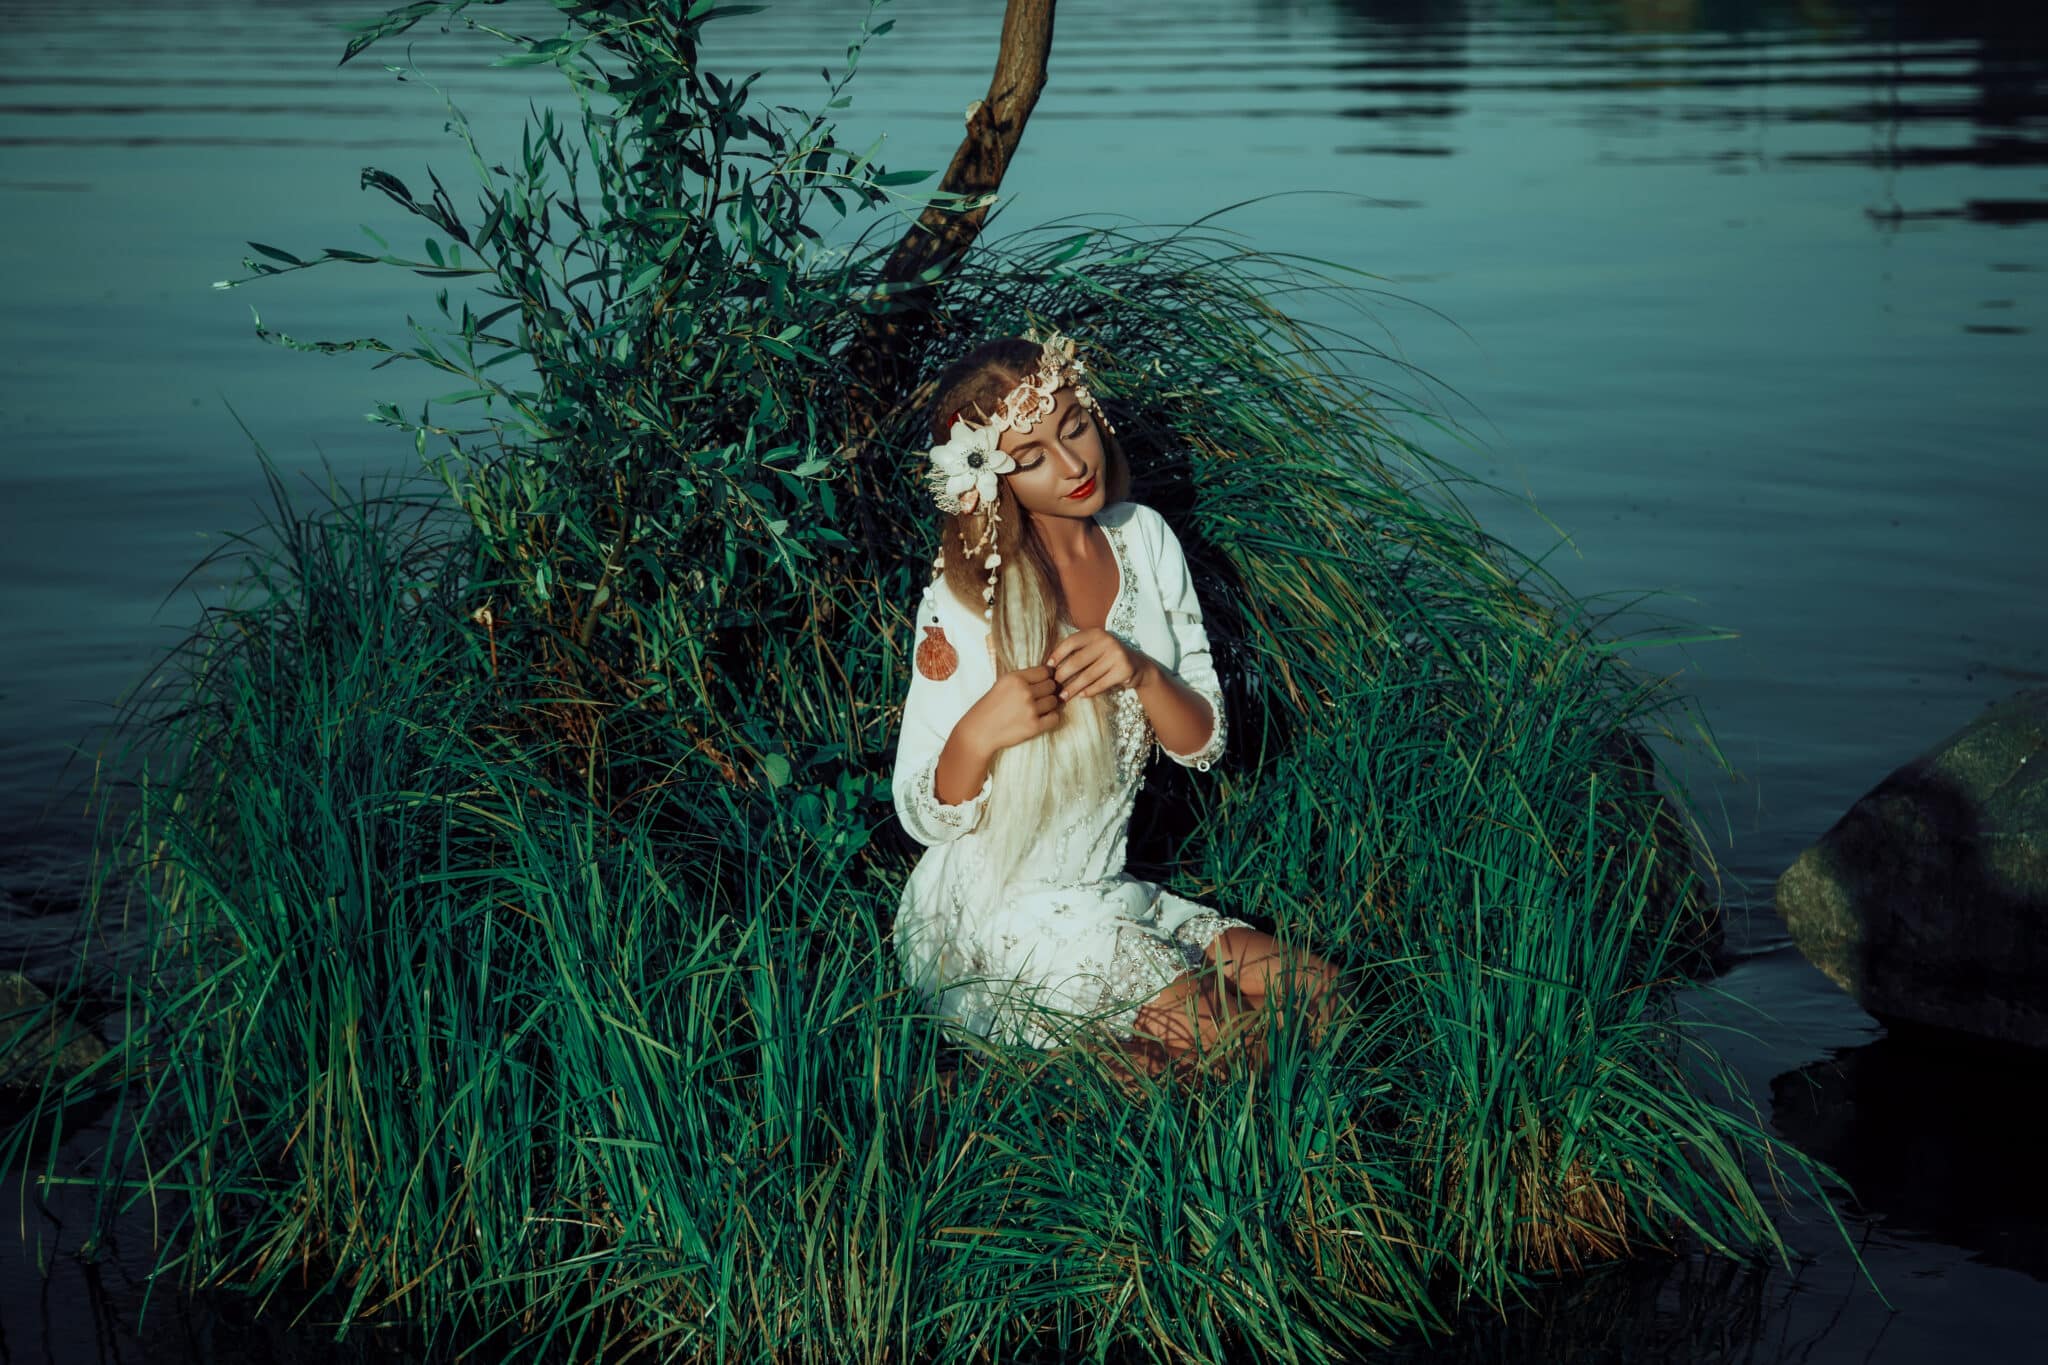 Fairy sitting on the grass in the middle of the lake. A wreath m